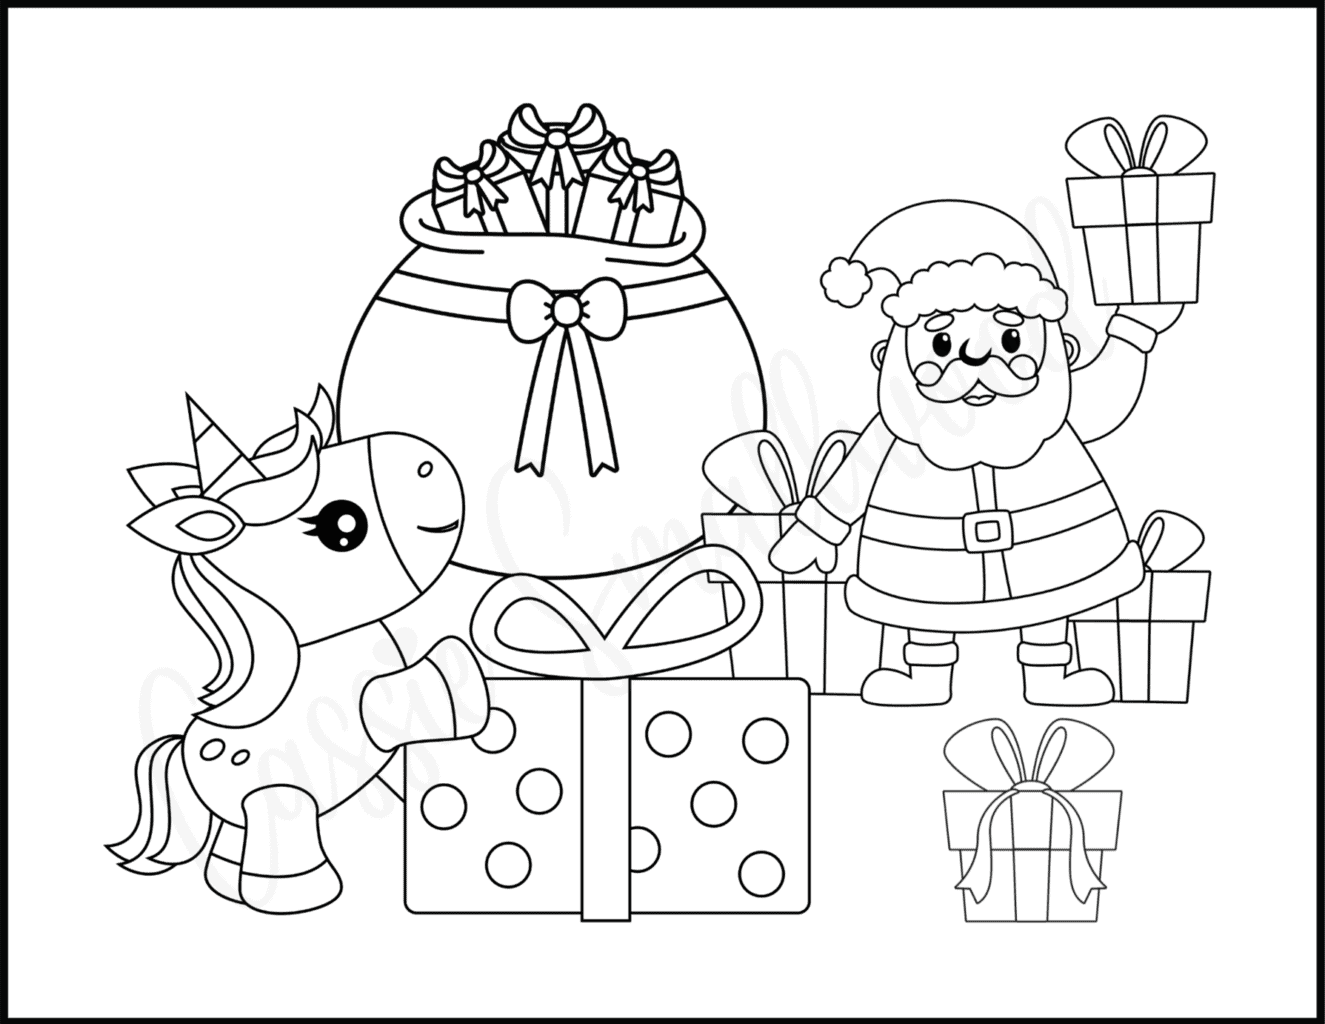 Cute Christmas Unicorn Coloring Pages Free Printables ~ Cassie Smallwood